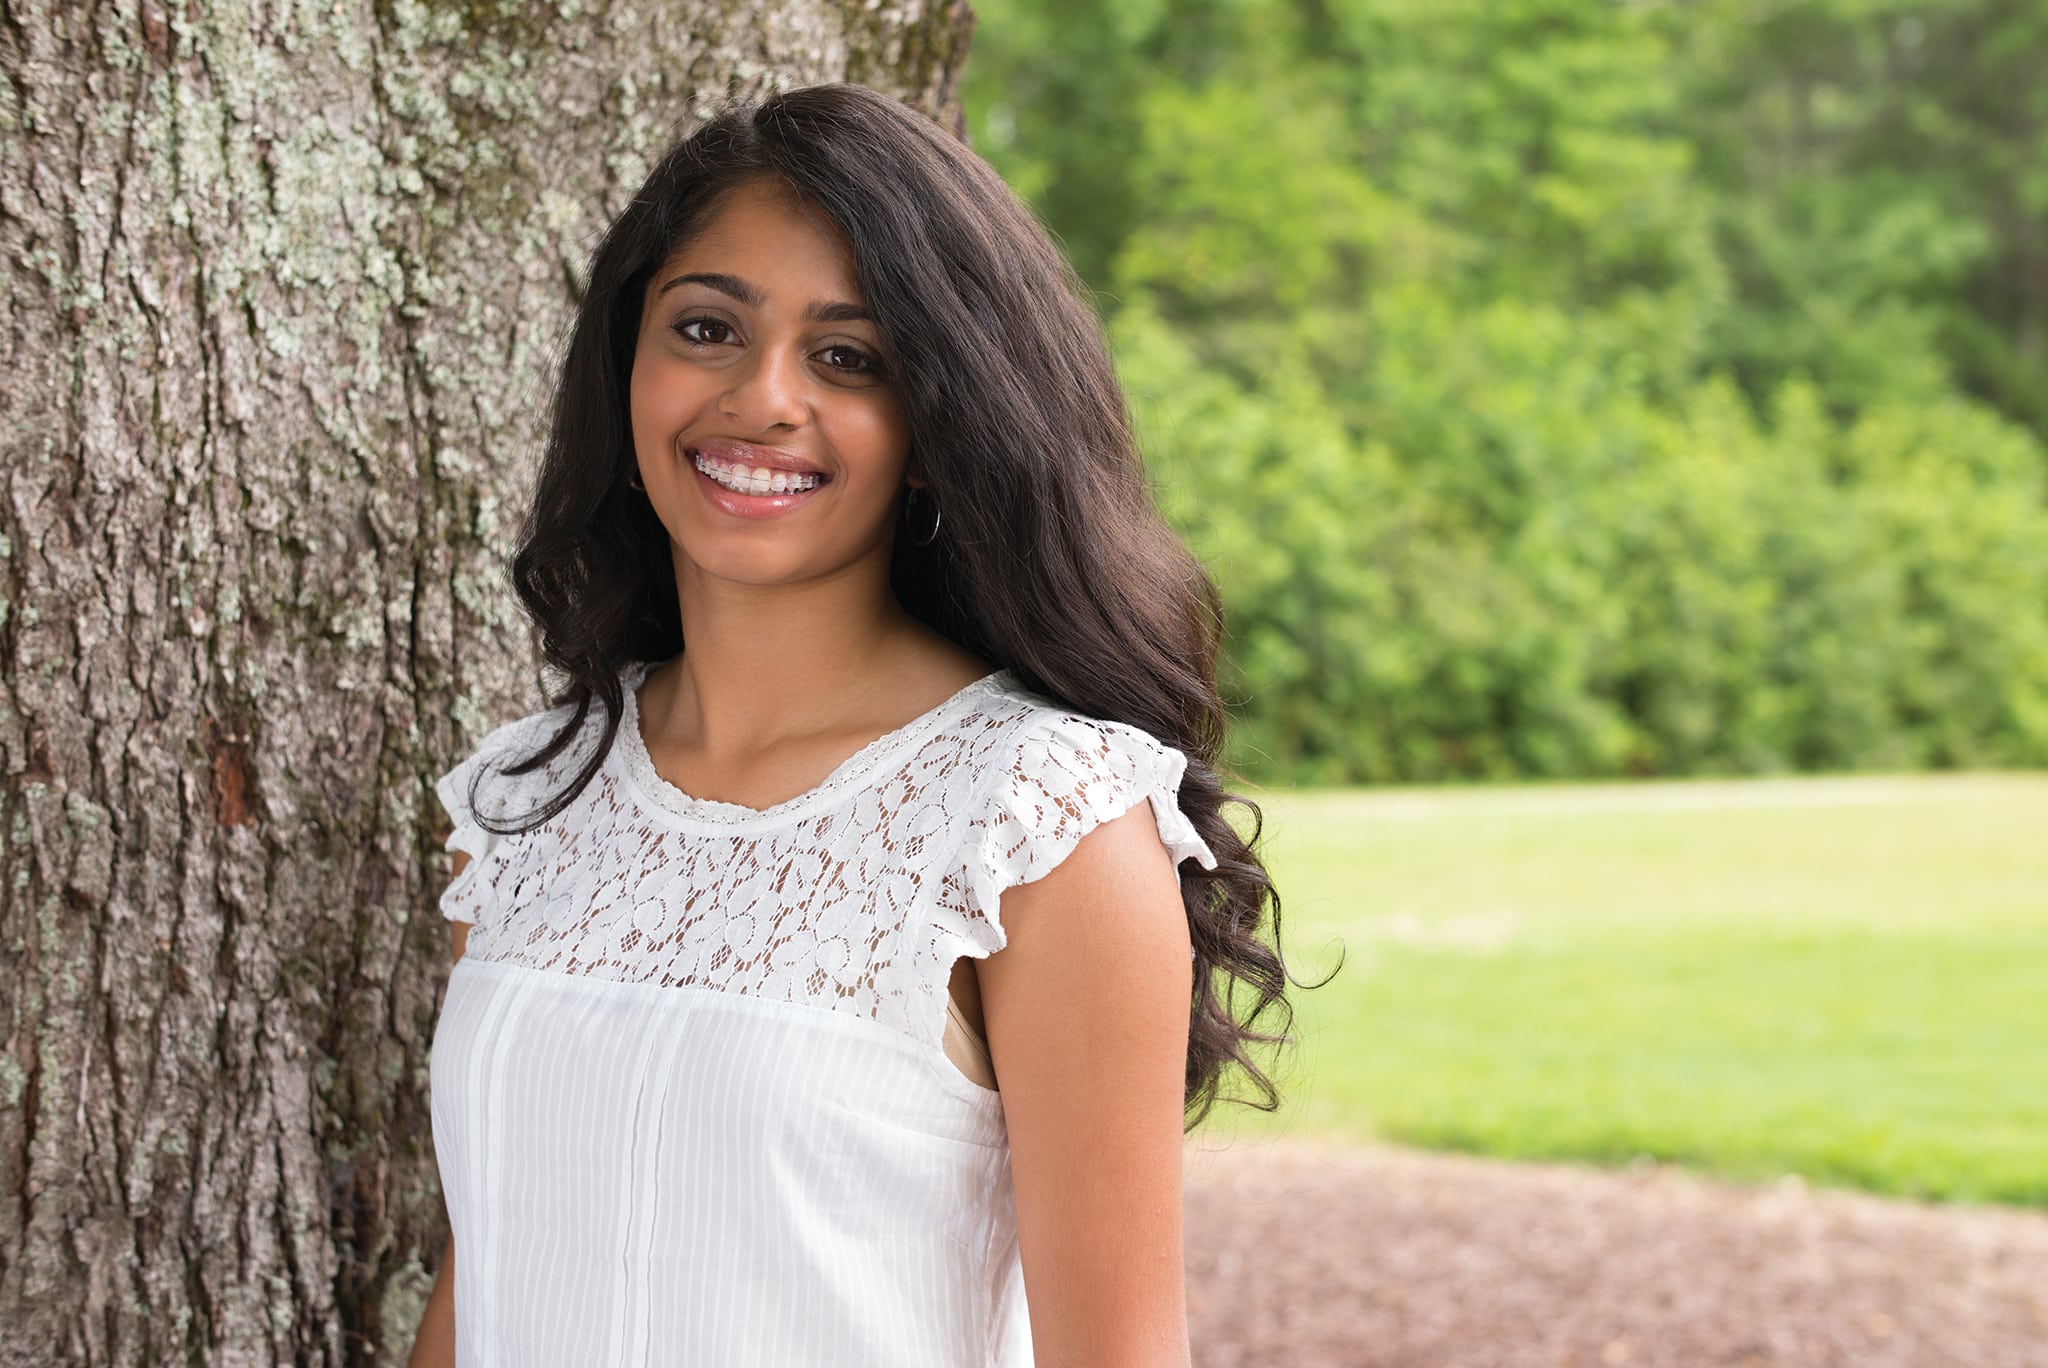 A girl with a white blouse smiling in front of a tree.